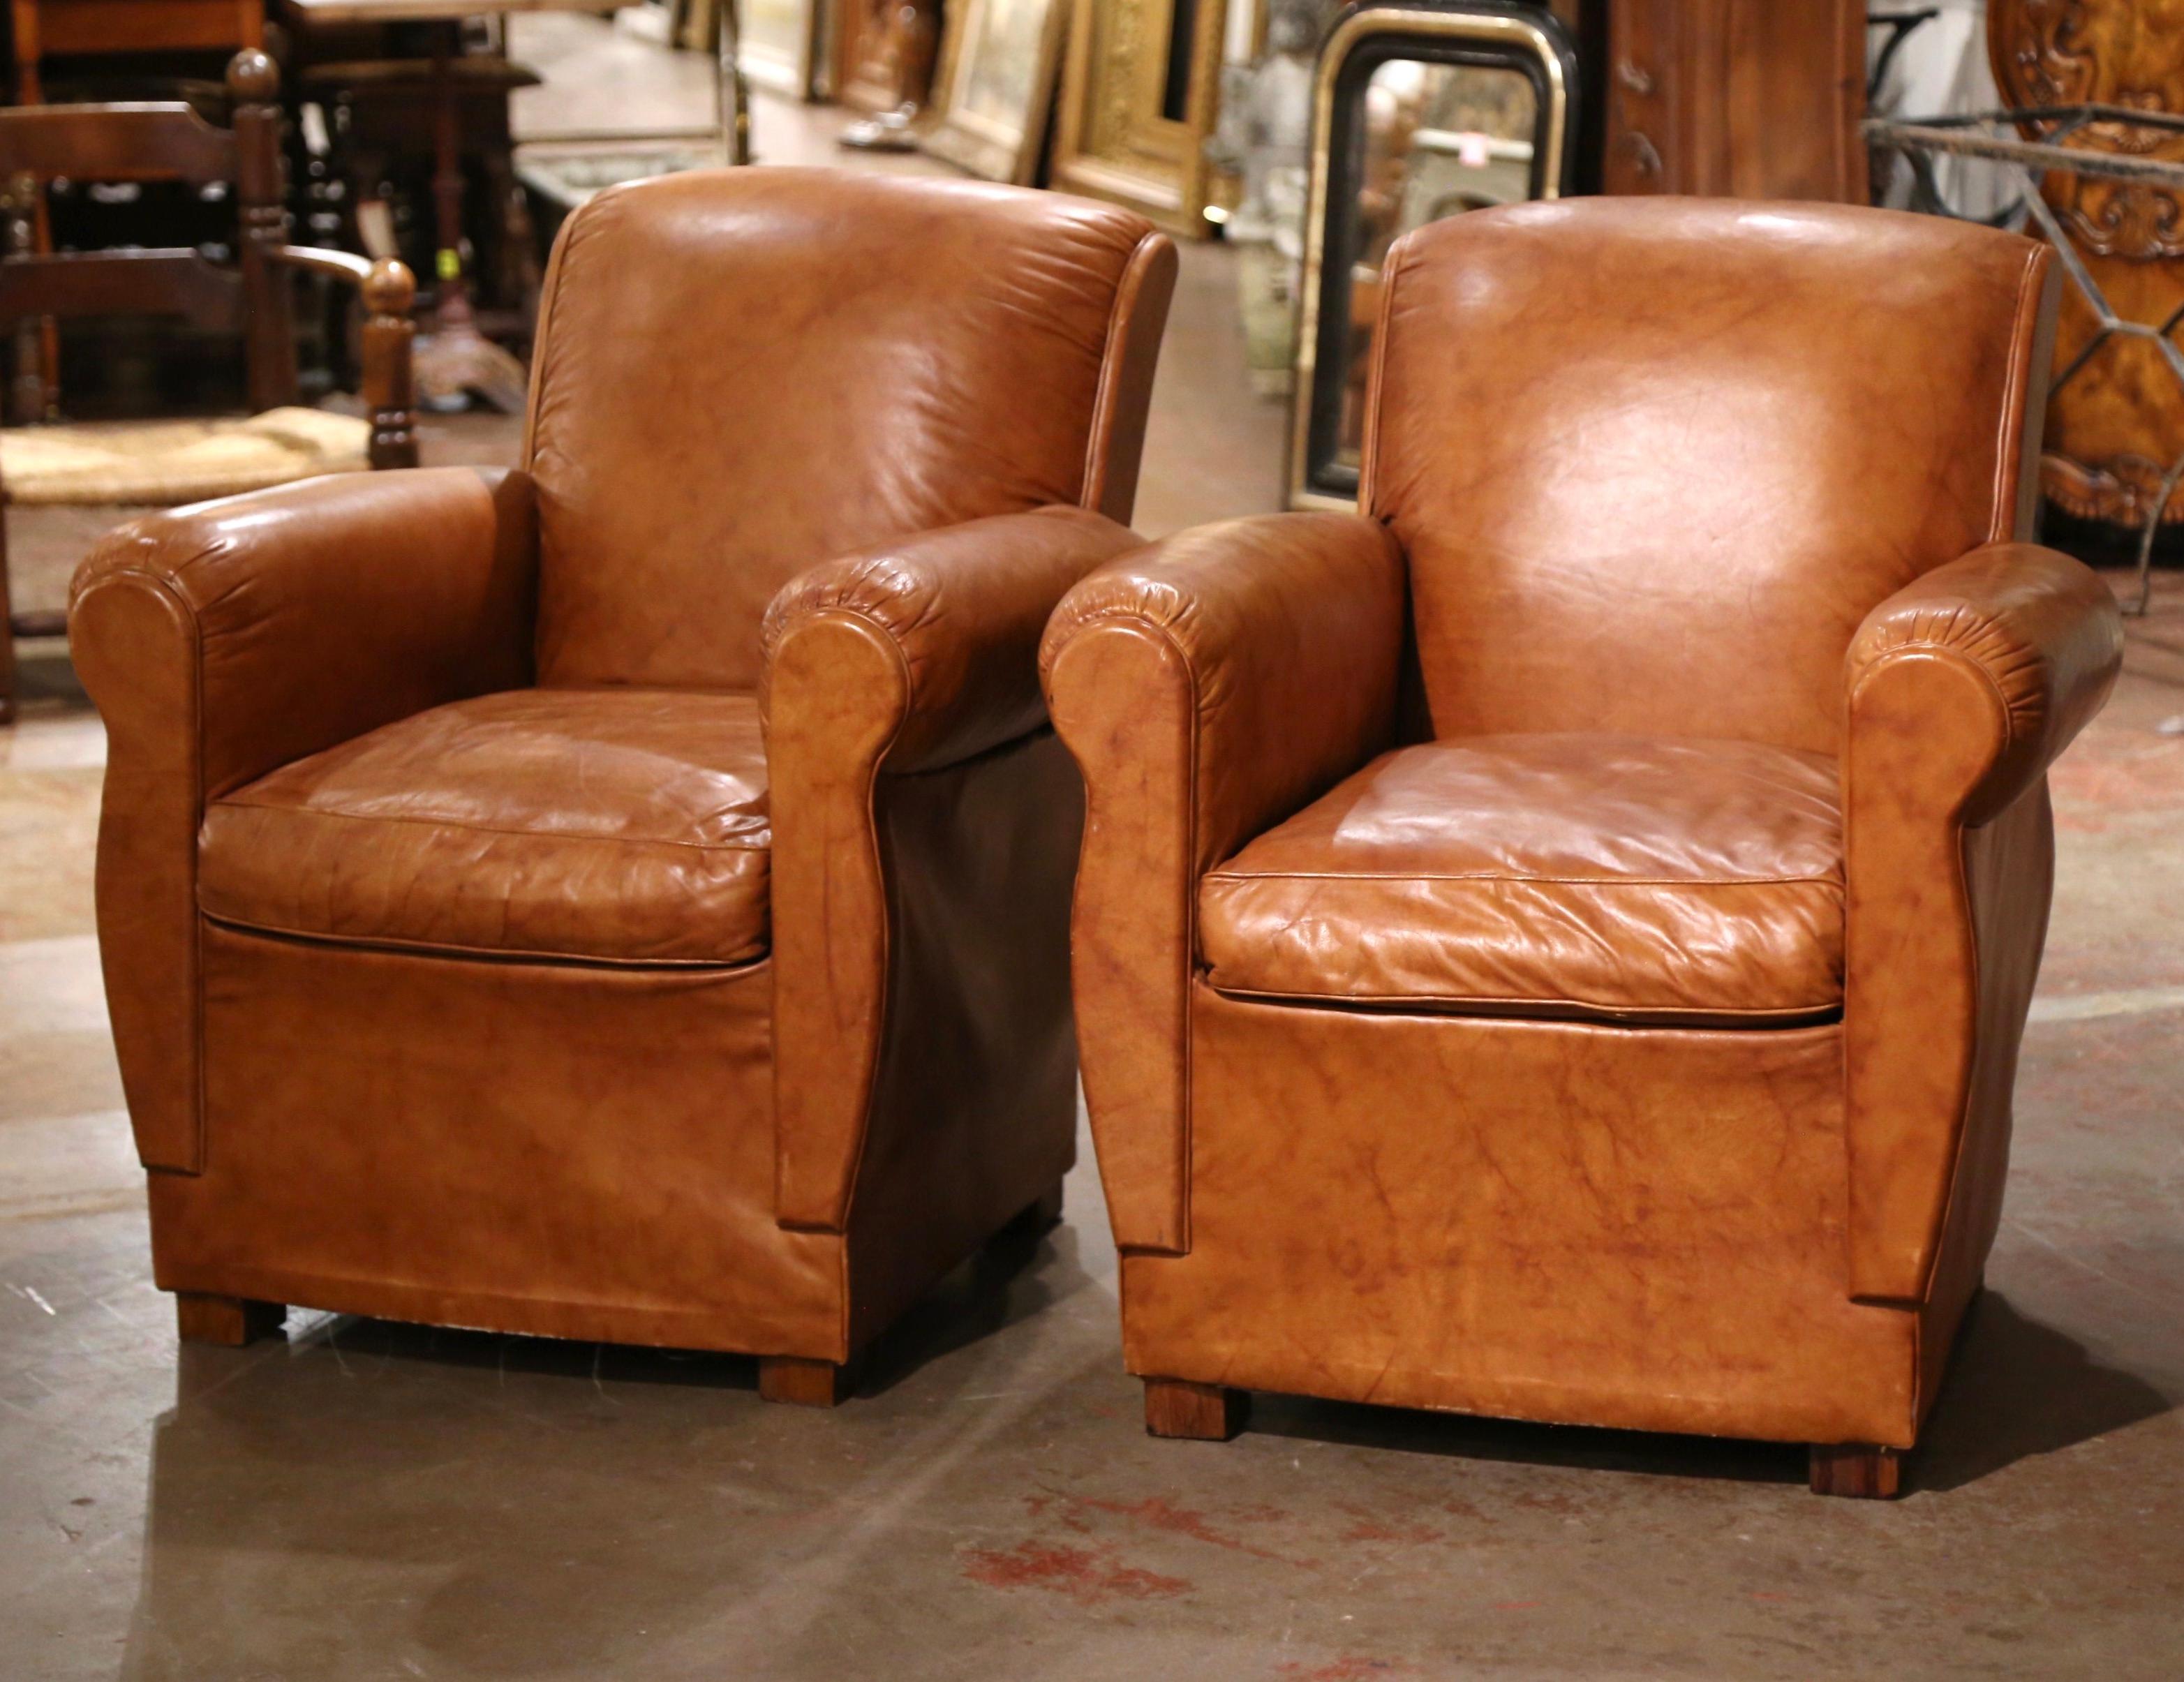 These classic, antique Art Deco club chairs were crafted in France, circa 1970. The stately chairs stand on square feet, and feature wide, rounded armrests, over an arched and rolled shape back. The Classic, masculine French chairs with loose